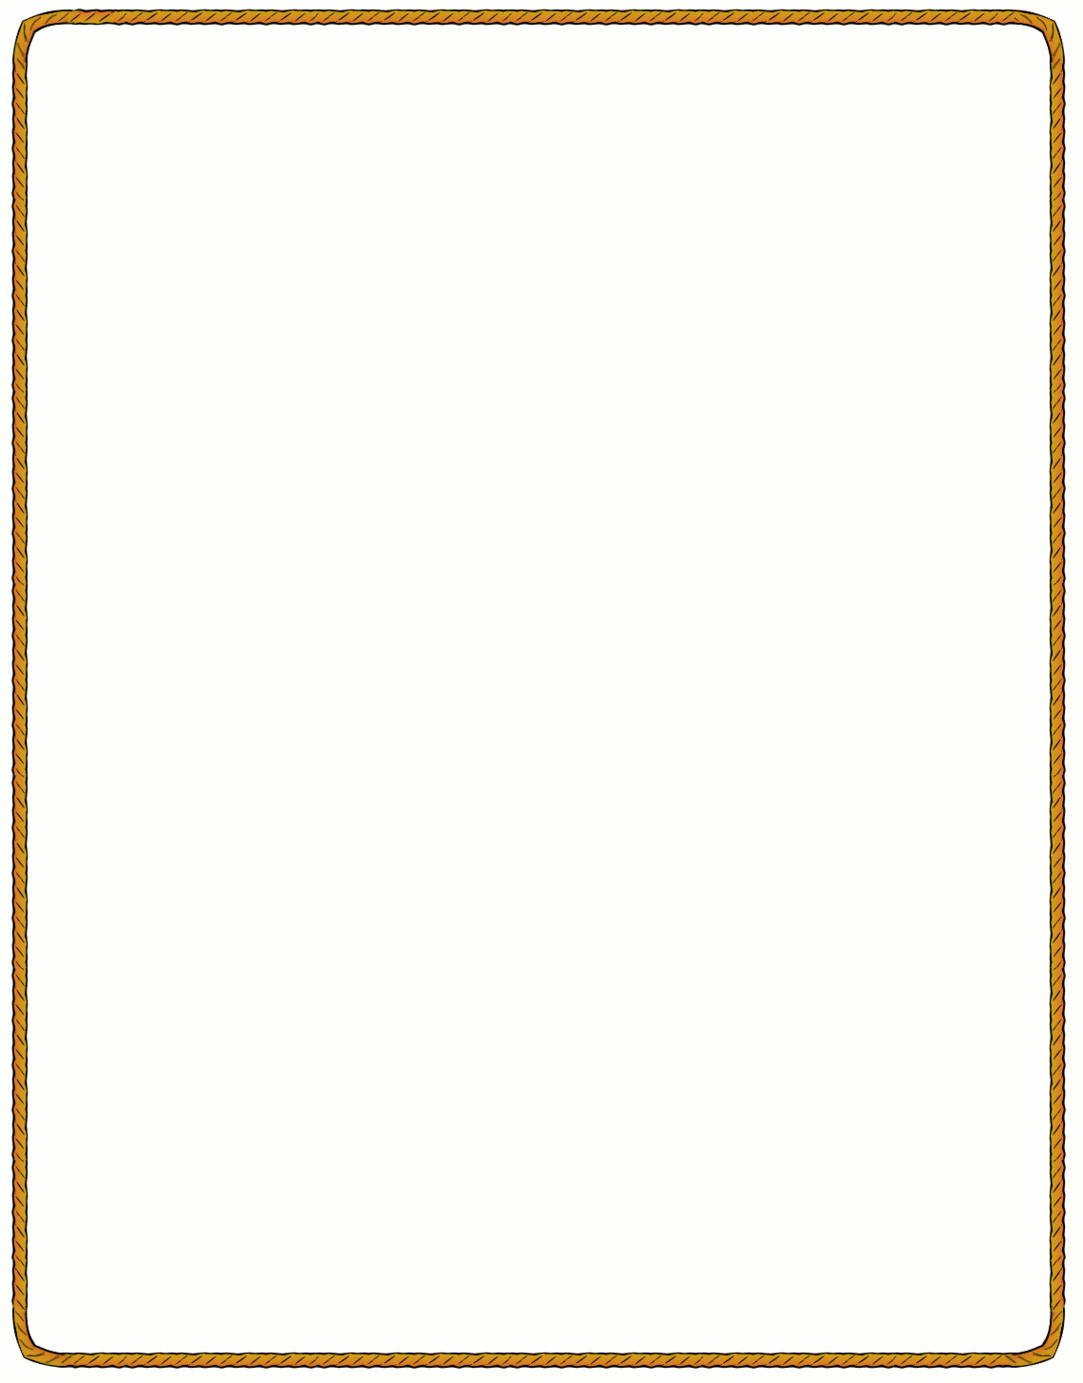 Border Frame Png Clipart - Free to use Clip Art Resource